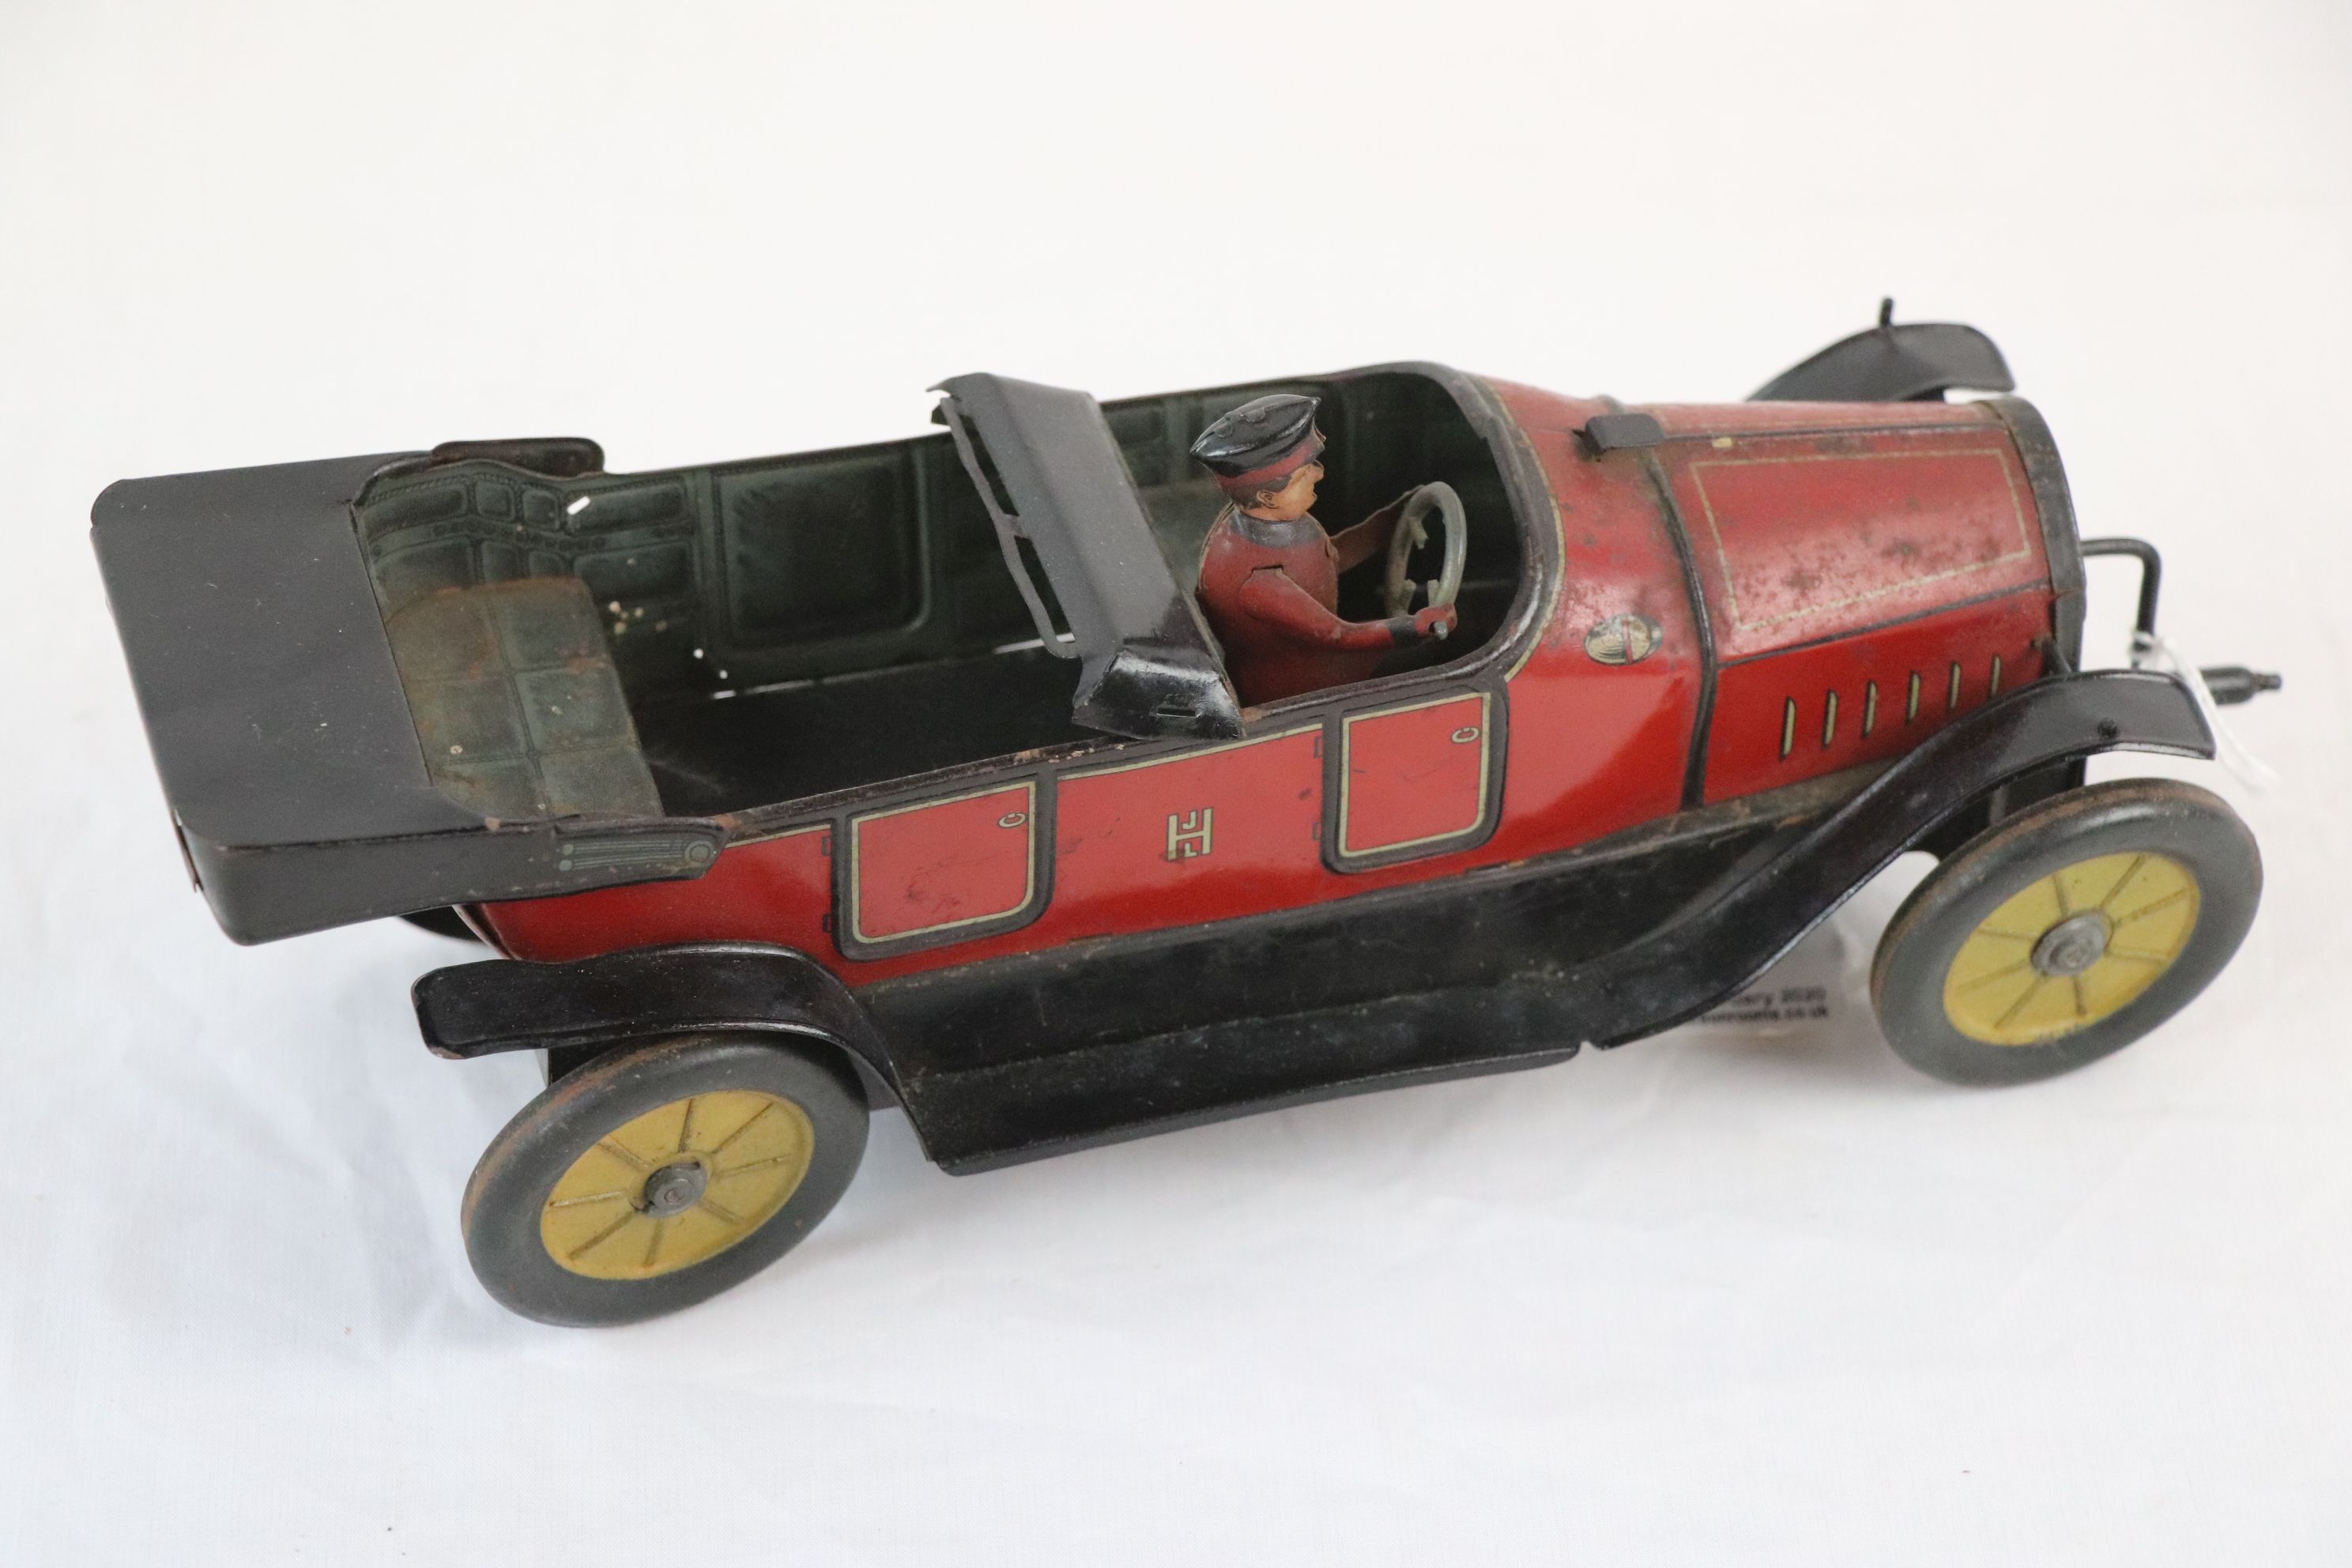 Early-mid 20th C HJL tin plate car with driver, in red with black, gd overall condition